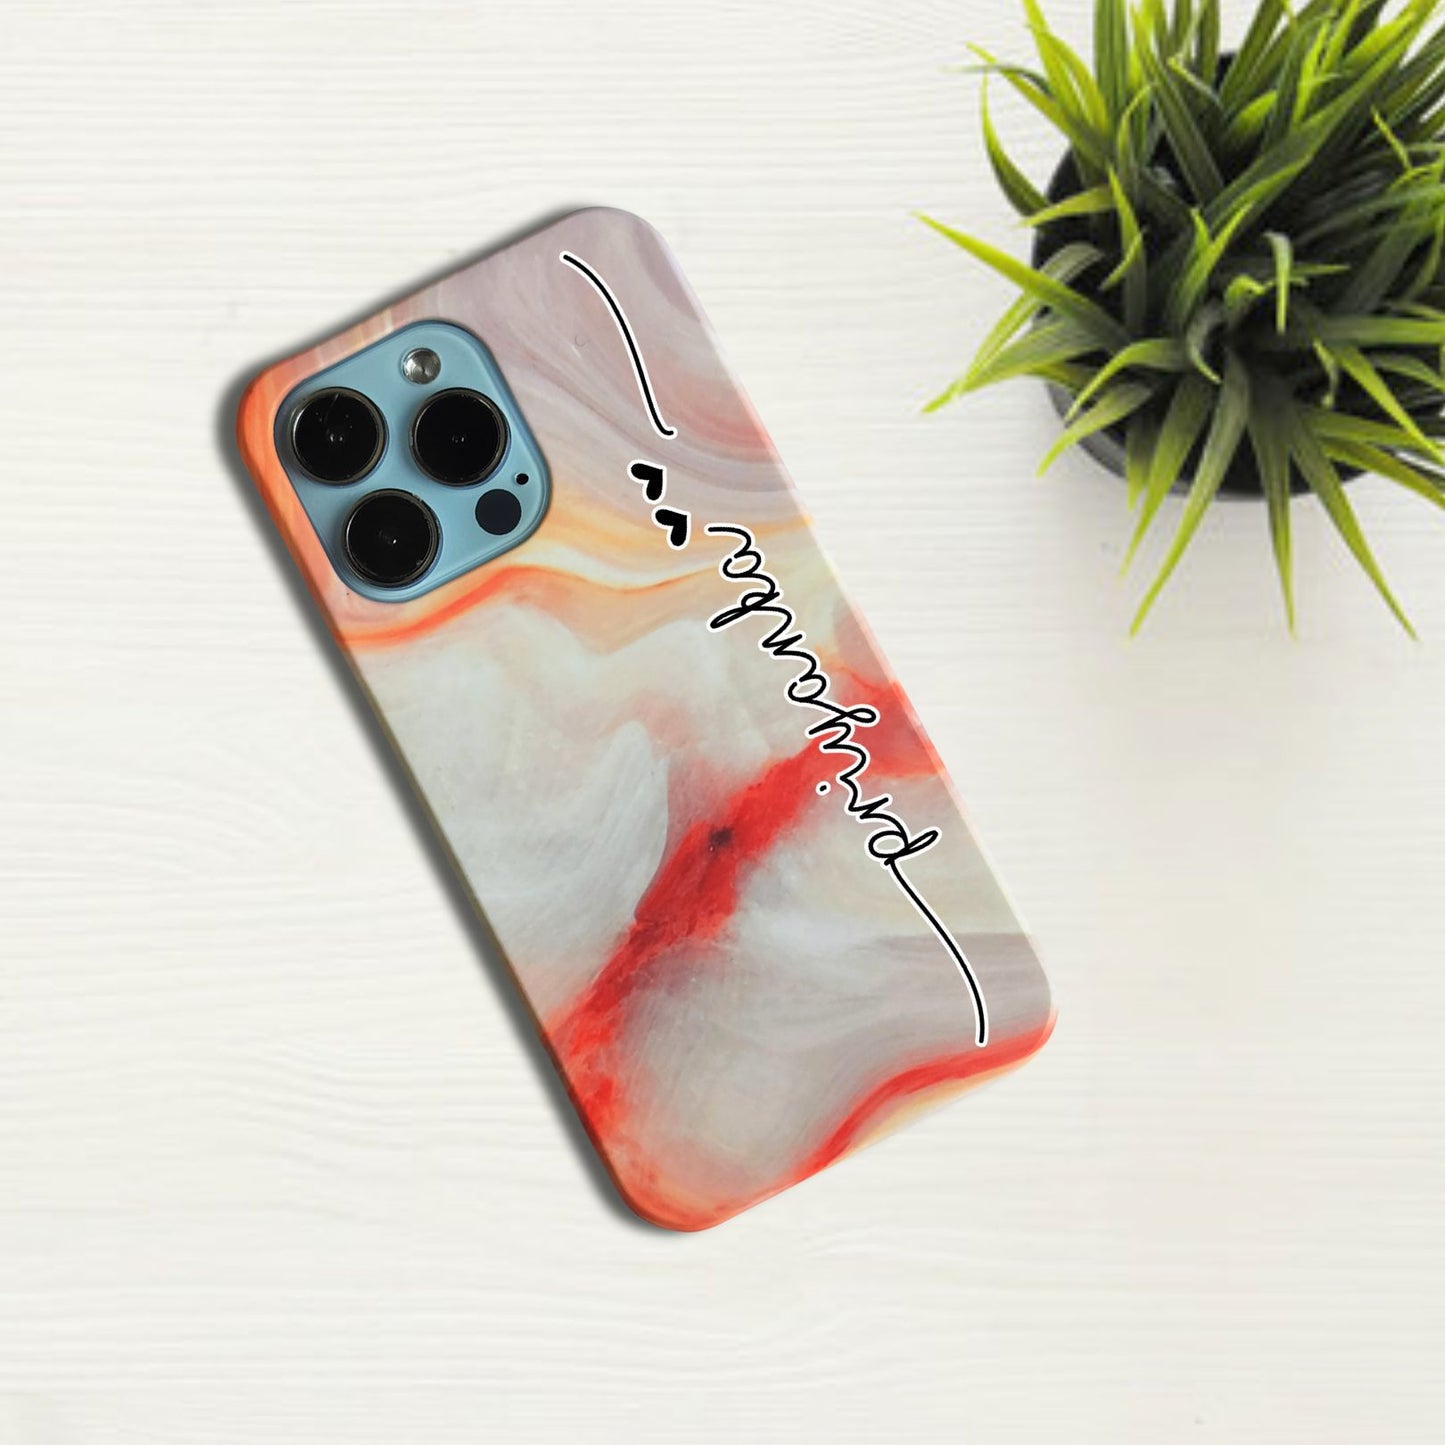 Flotterring Marble Effect V2 Phone Case Cover For iPhone